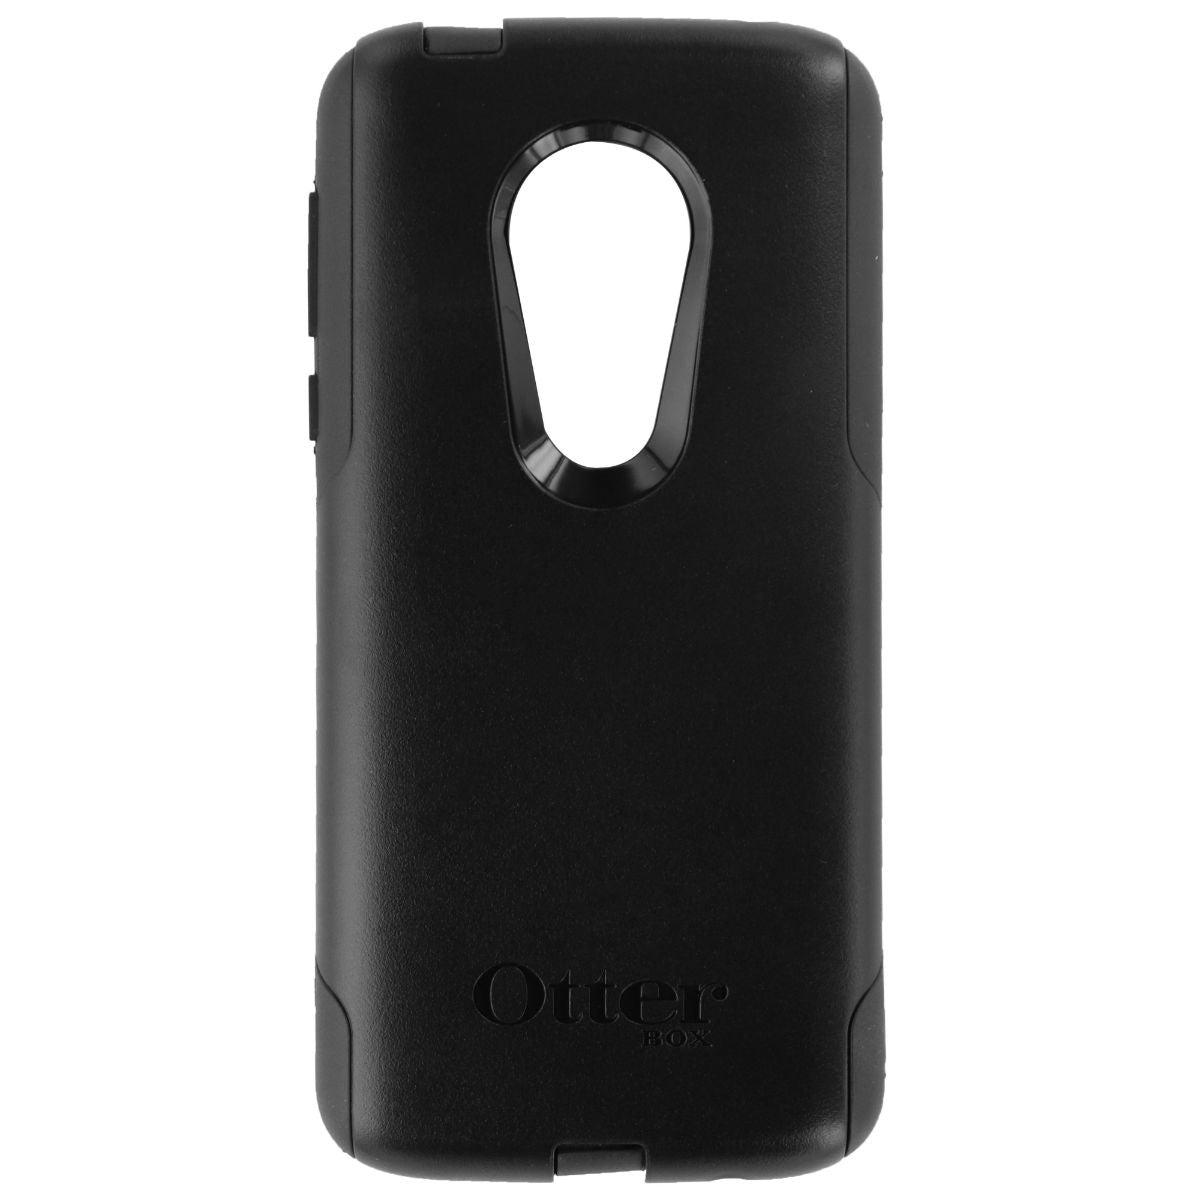 OtterBox Commuter Series Dual Layer Case for Motorola Moto G6 Play - Black